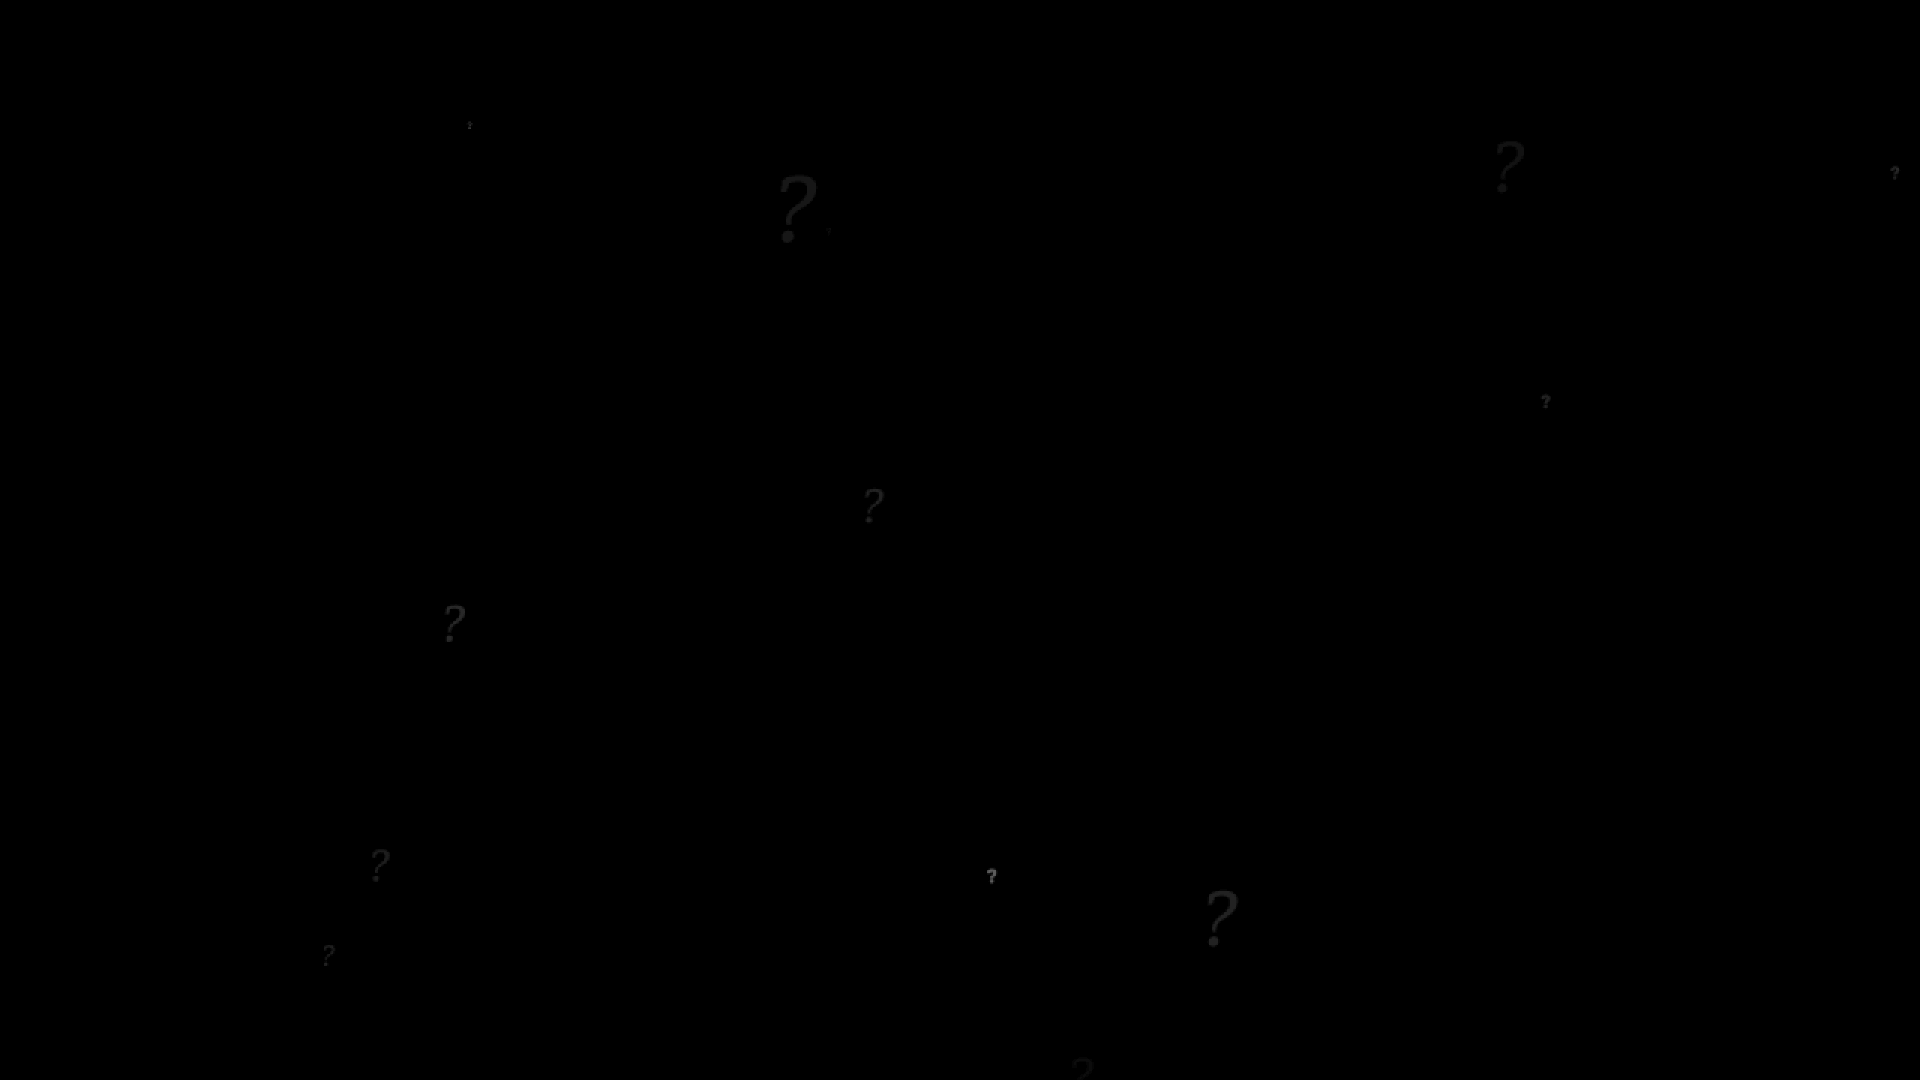 Animated illustration of question marks floating in space.